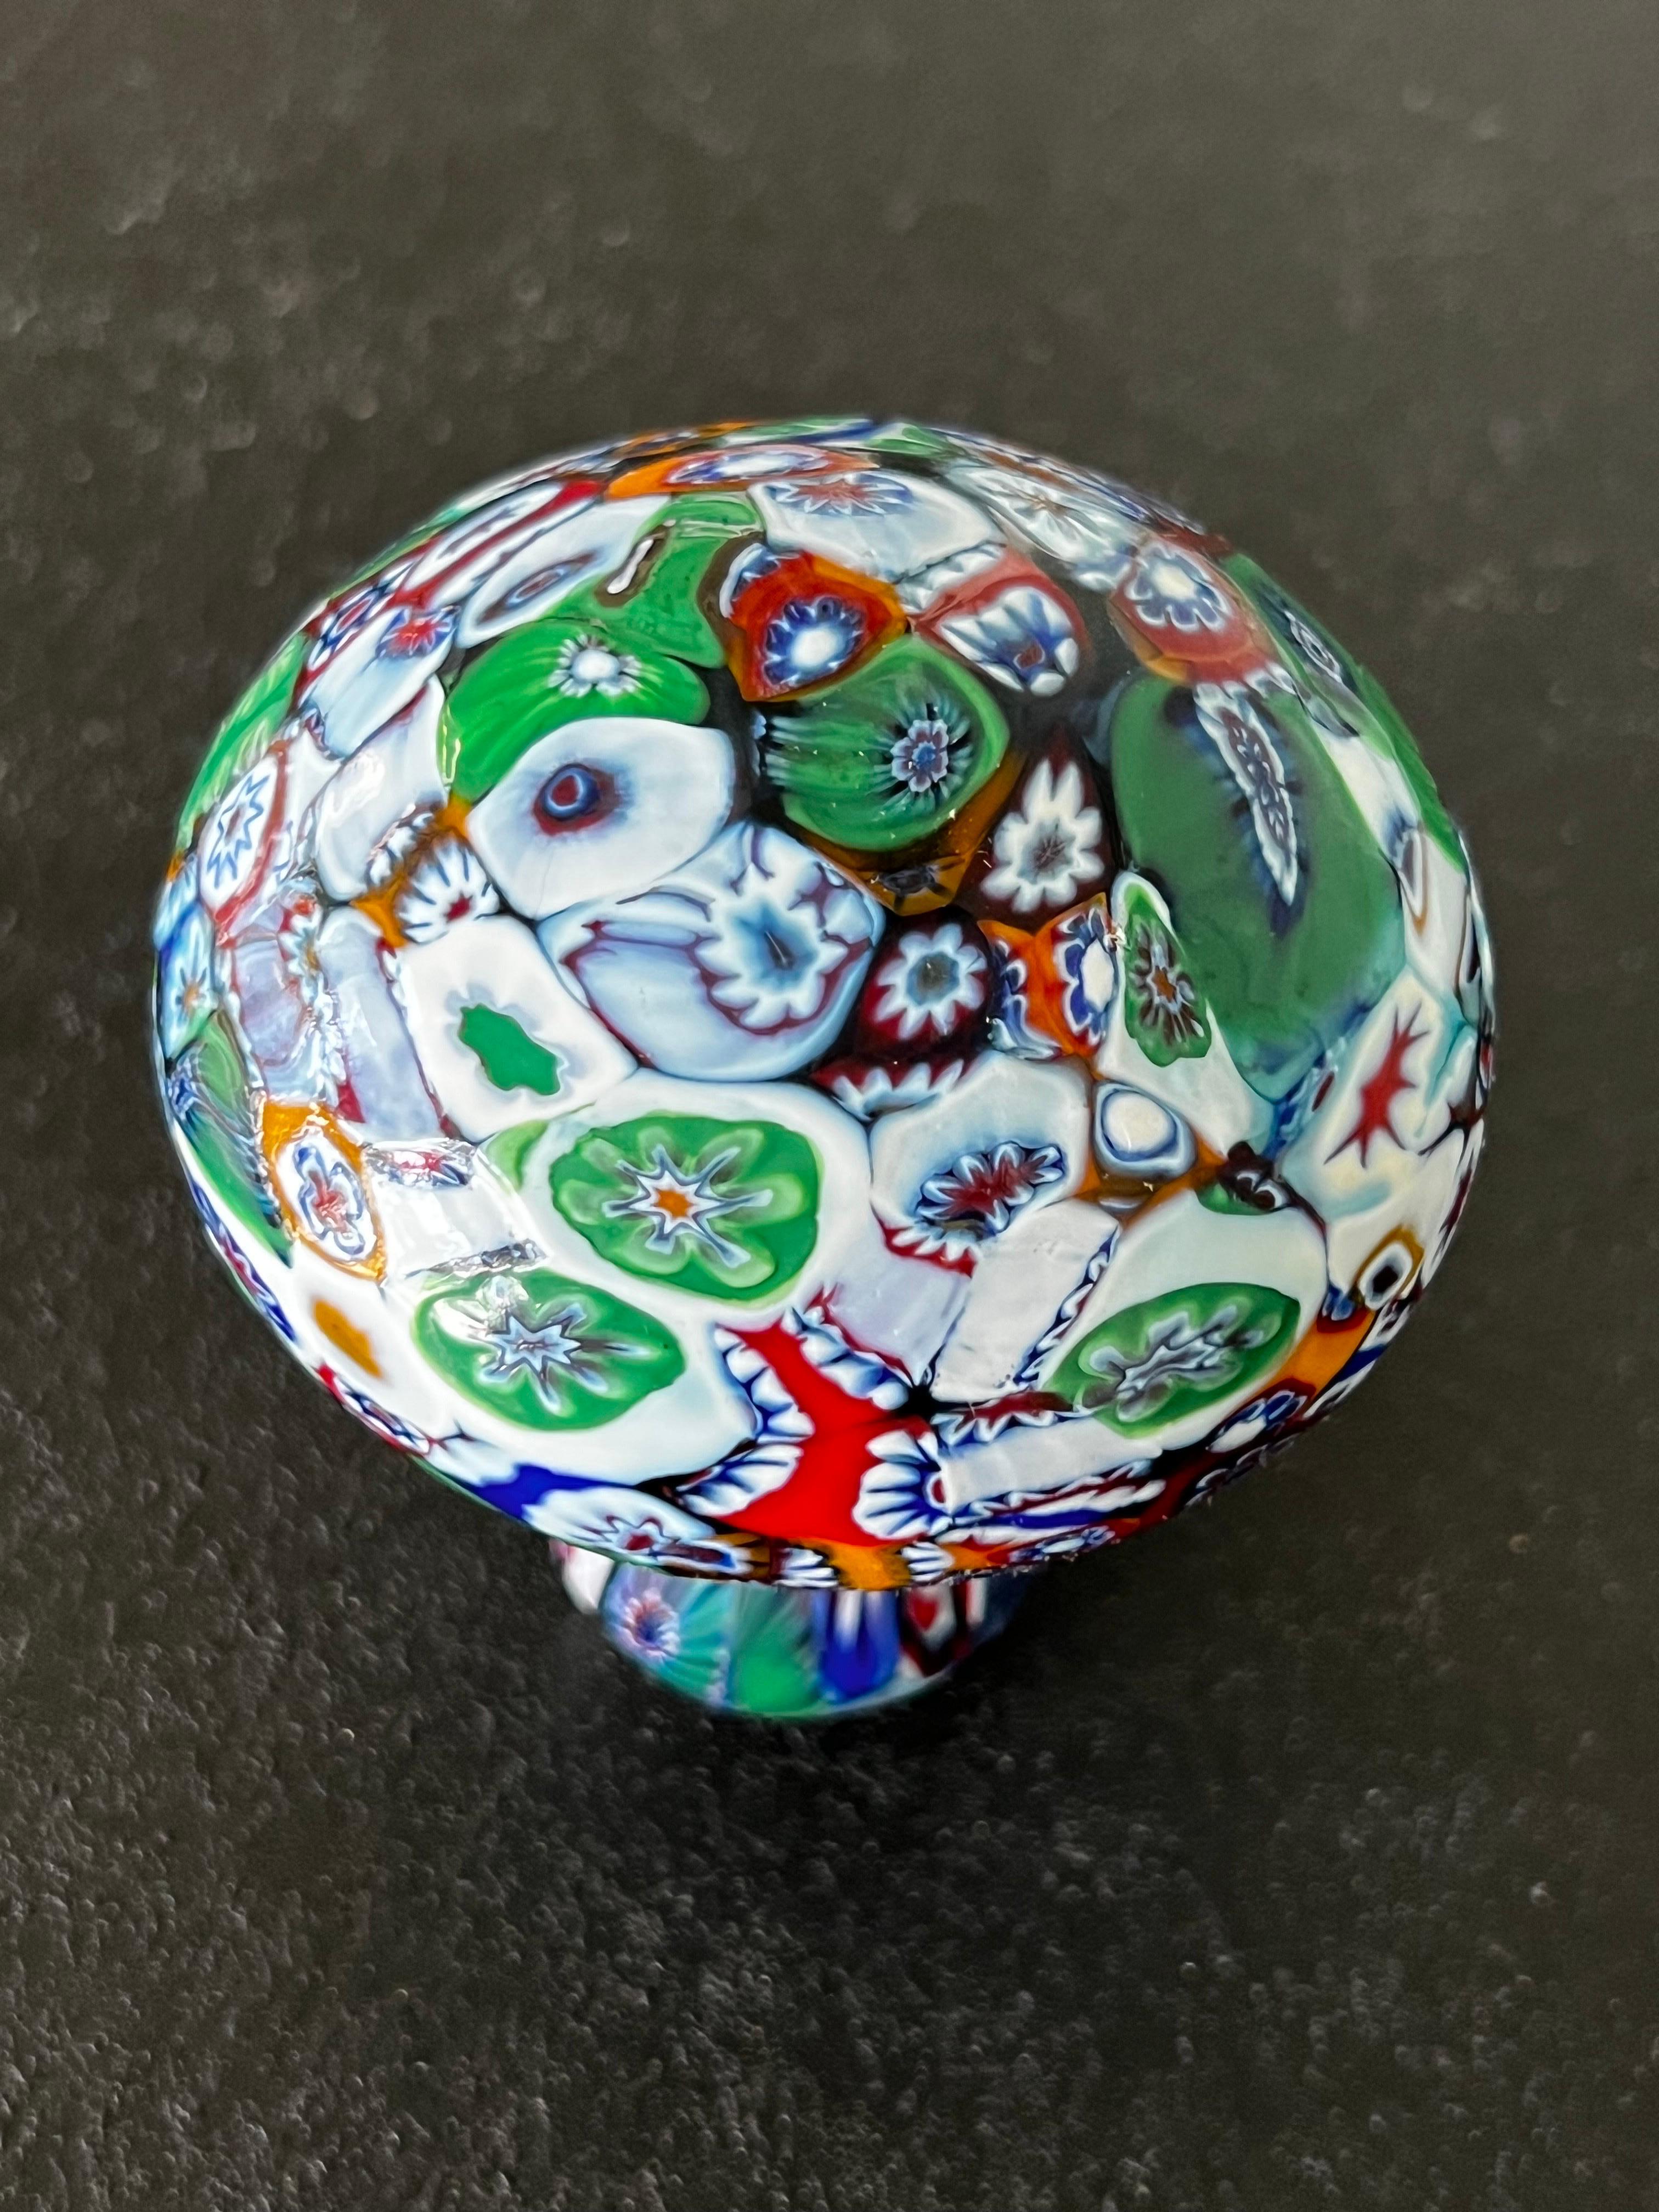 Vintage Millefiori Glass Mushroom Paperweight In Good Condition For Sale In Fort Washington, MD